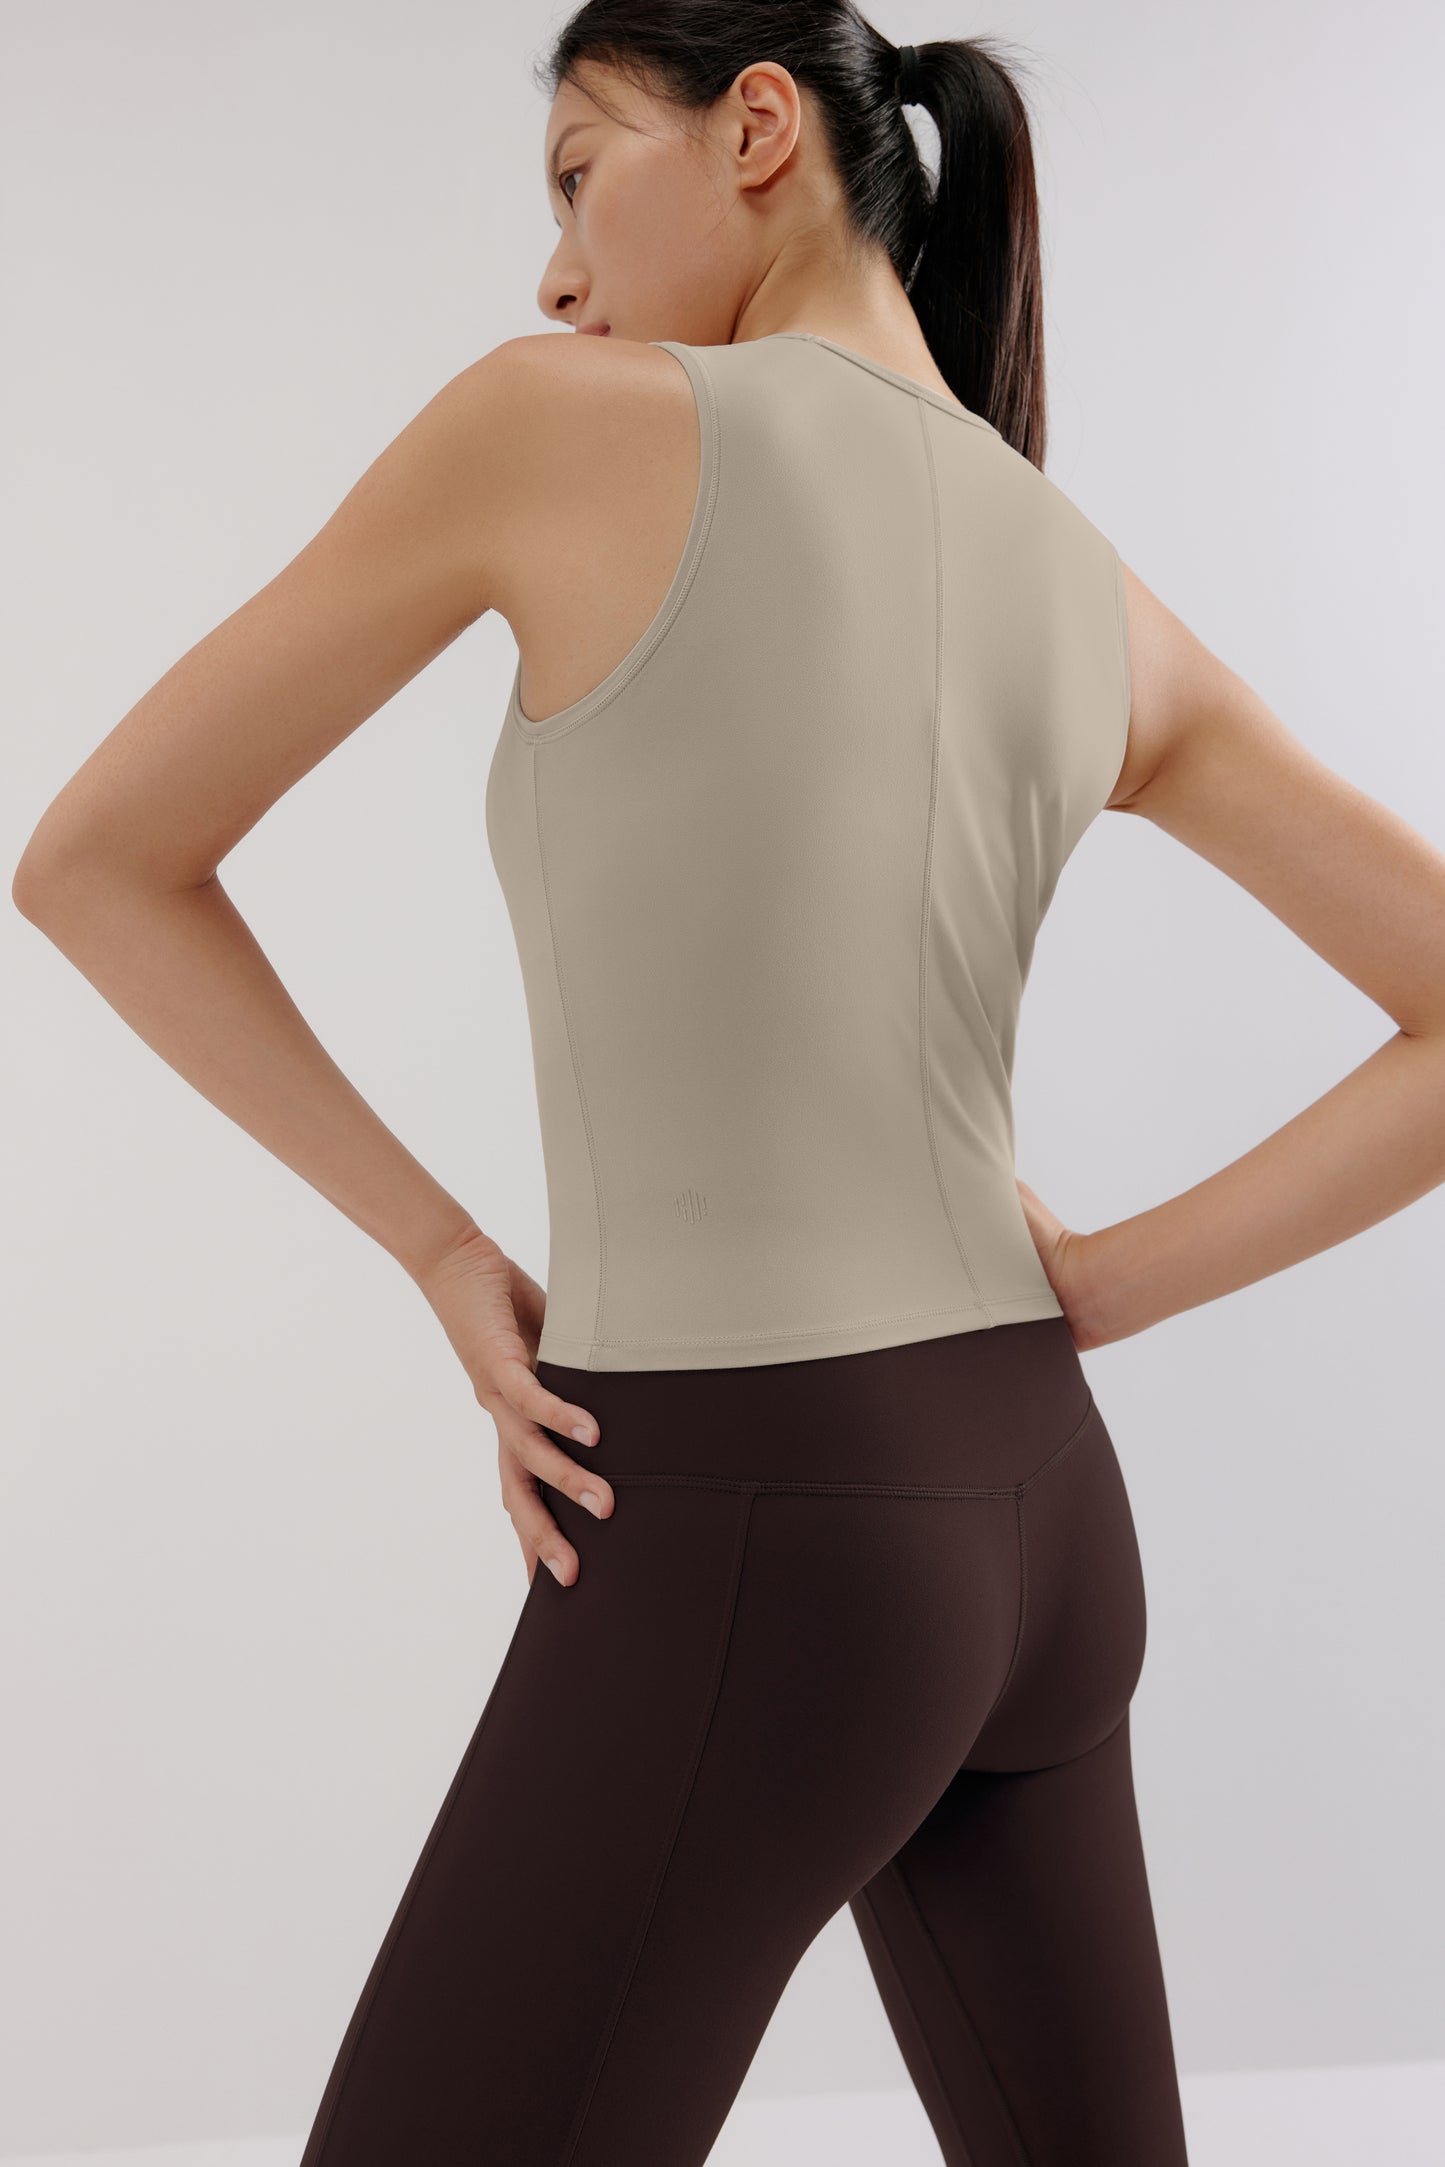 A woman wears a grey tank and brown leggings from back